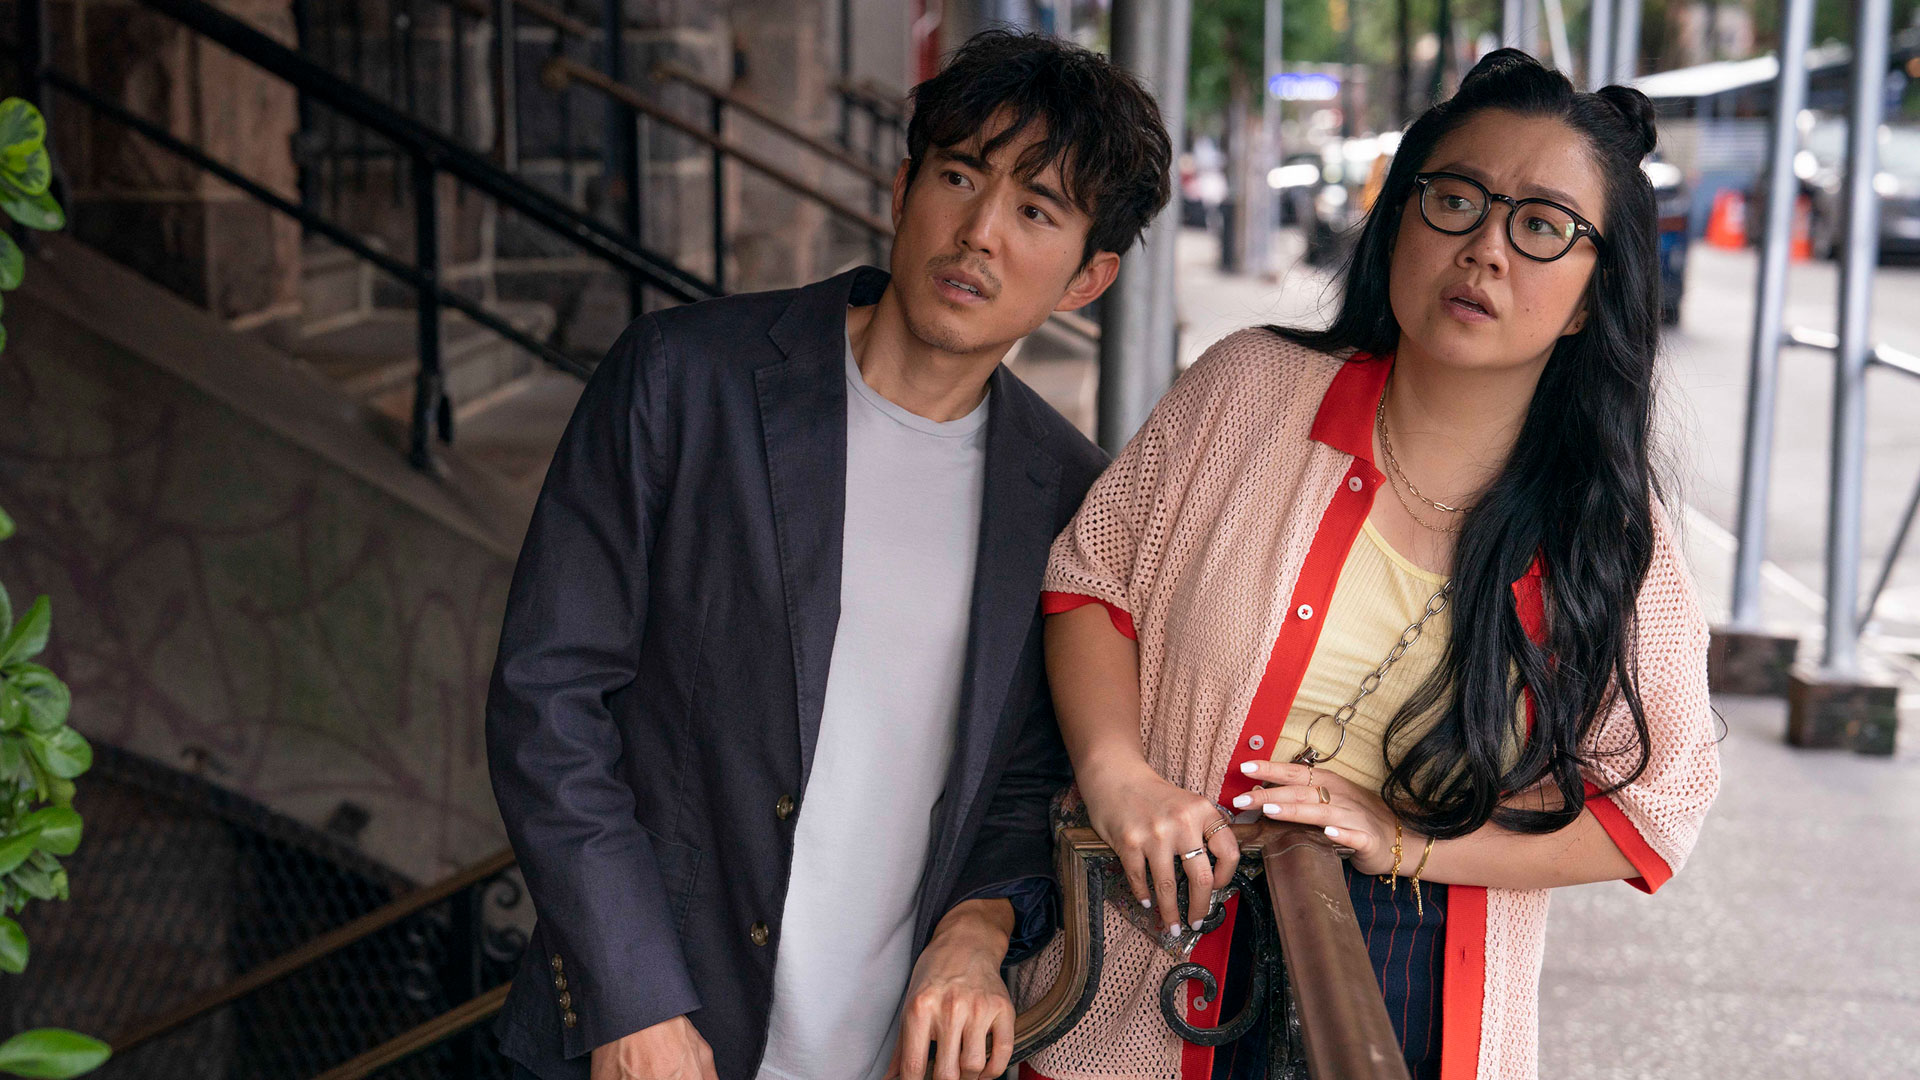 Sundance Review: ‘Shortcomings’Randall Park And Justin H. Min Are A Comedic Director/Actor Duo To Watch In This Well-Intentioned Comedy